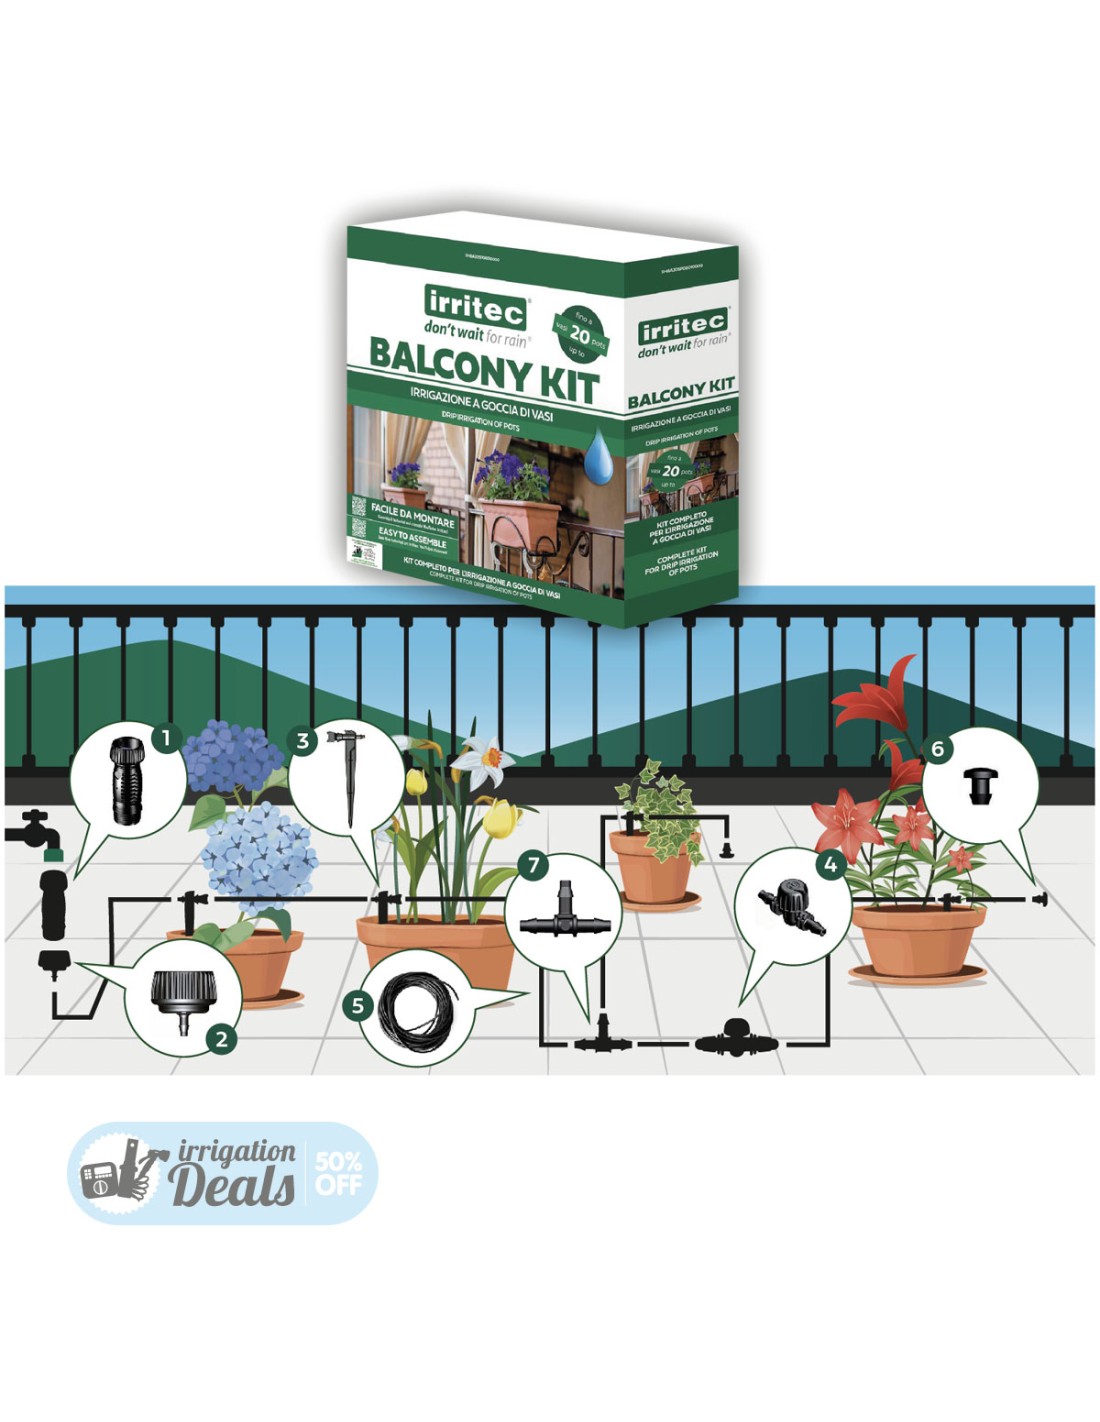 Irritec Balcony Kit Drip irrigation for potted plants - Stock Prices!